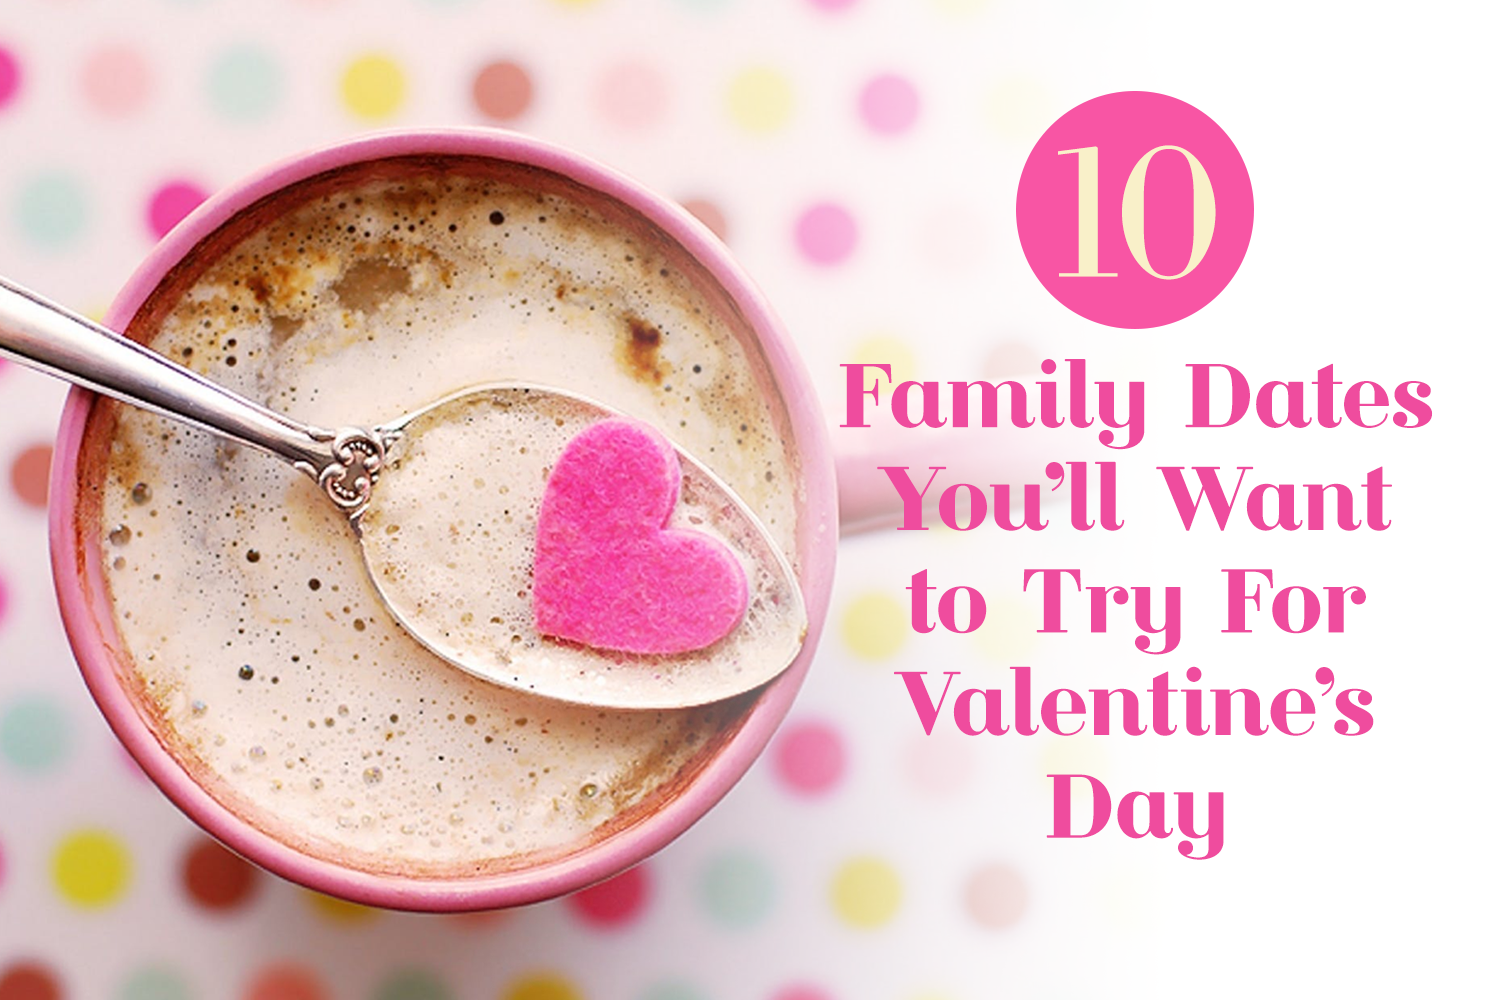 10 Family Dates for Valentine's Day